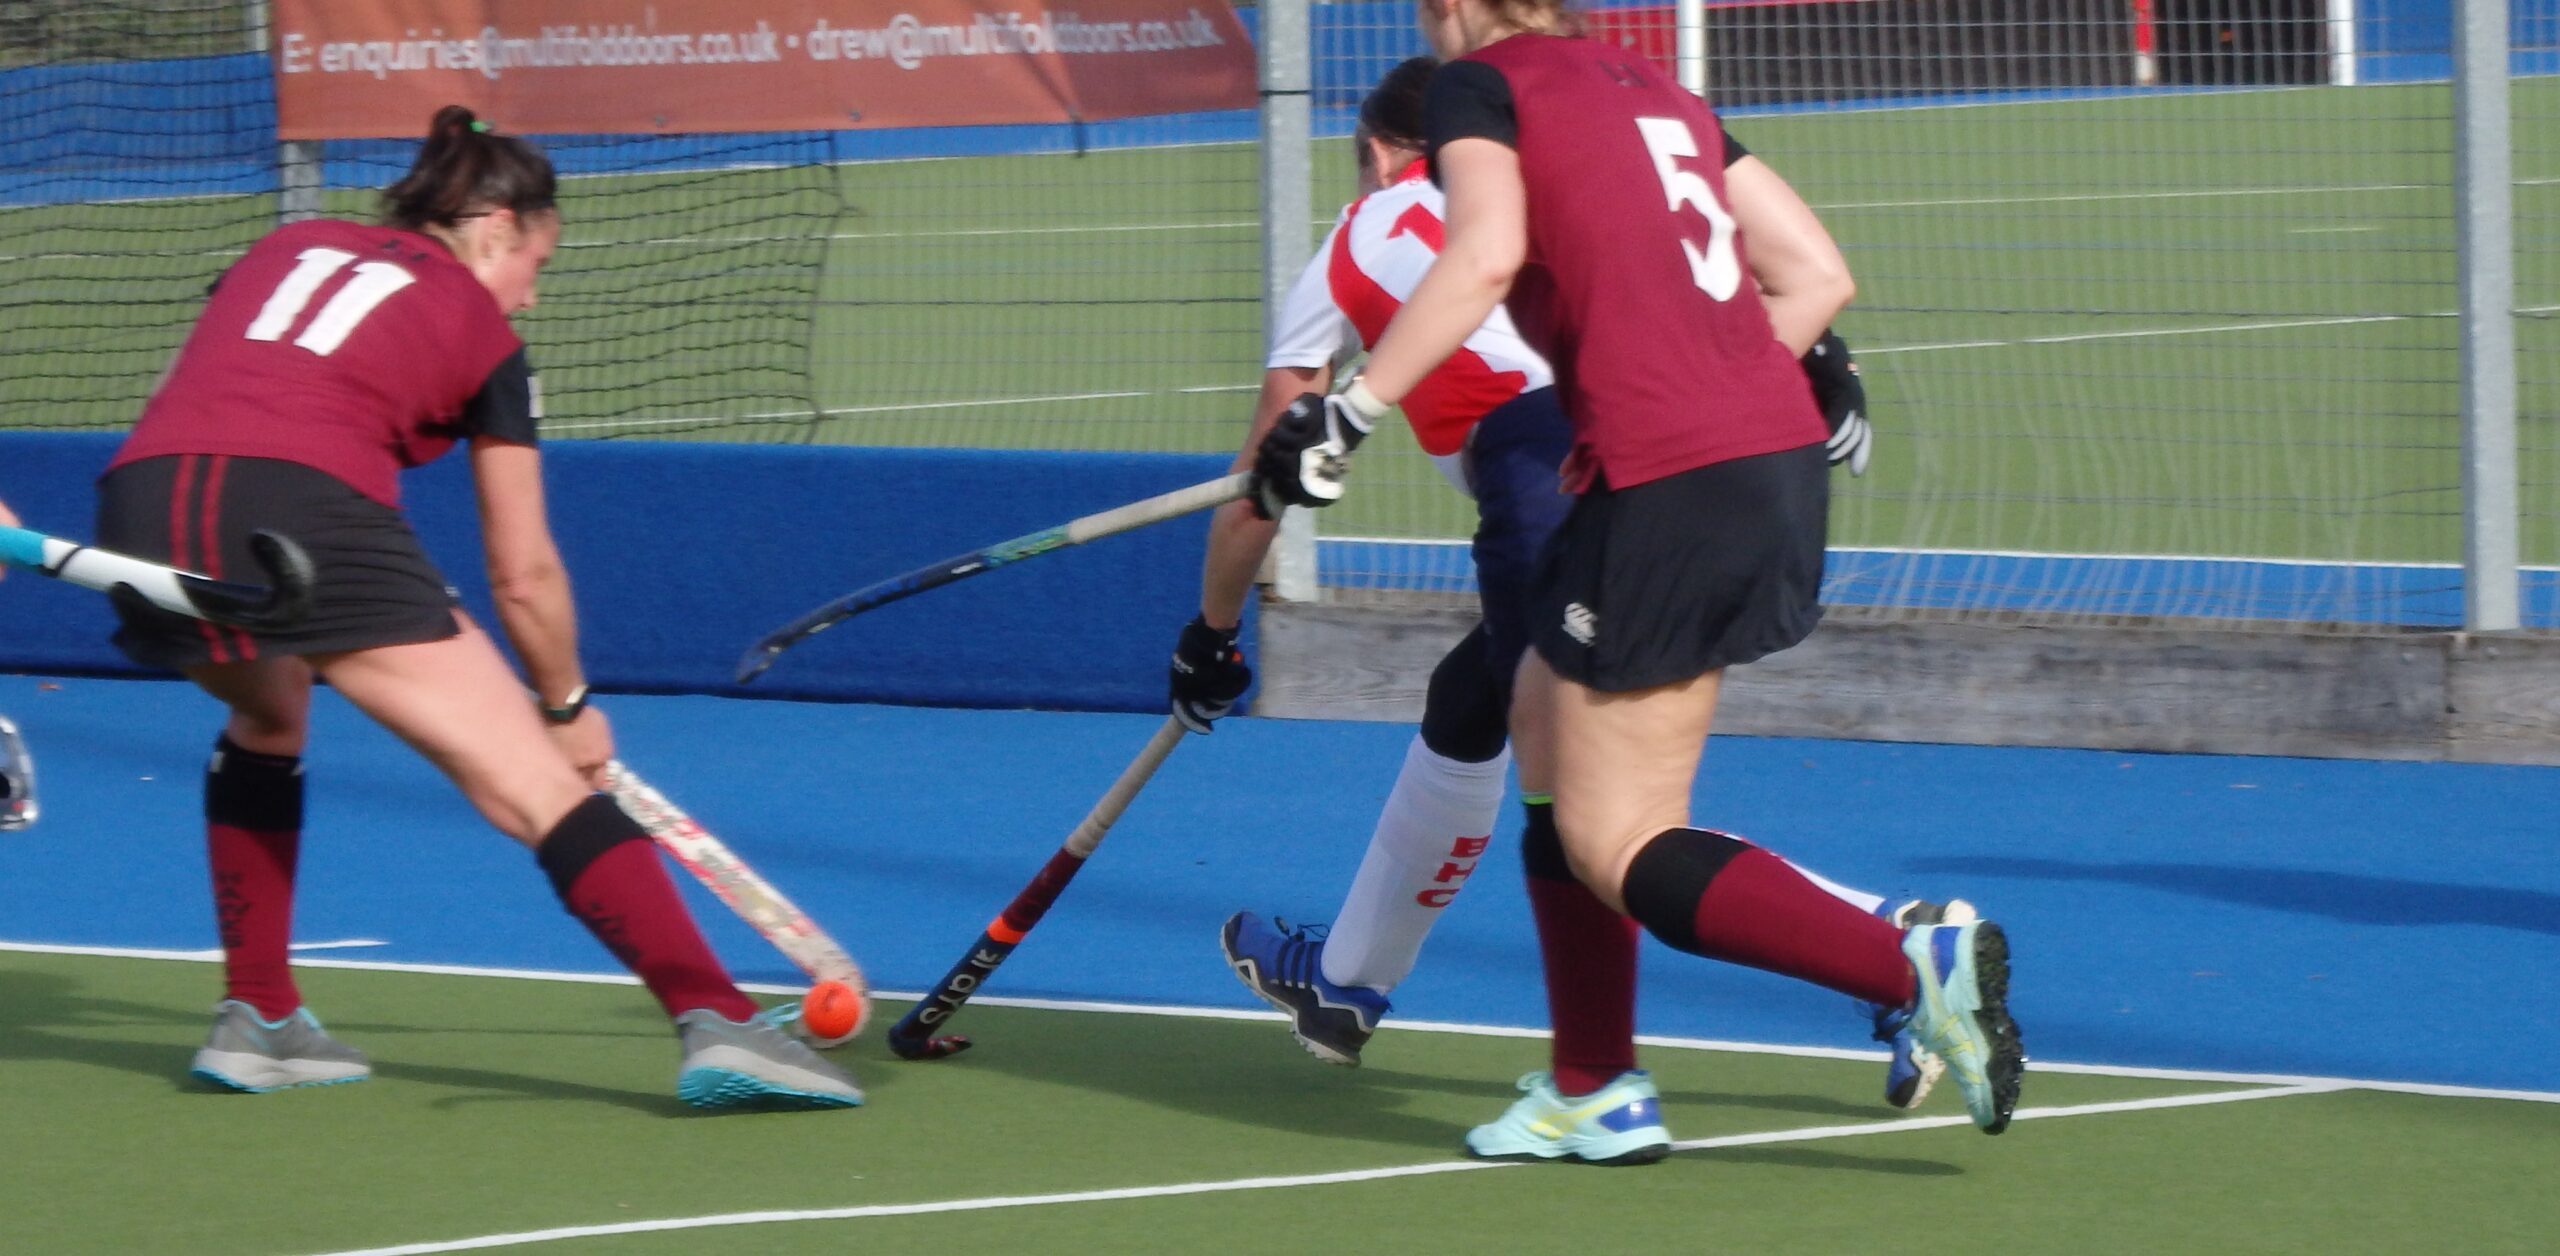 L1s joint top after beating Basingstoke